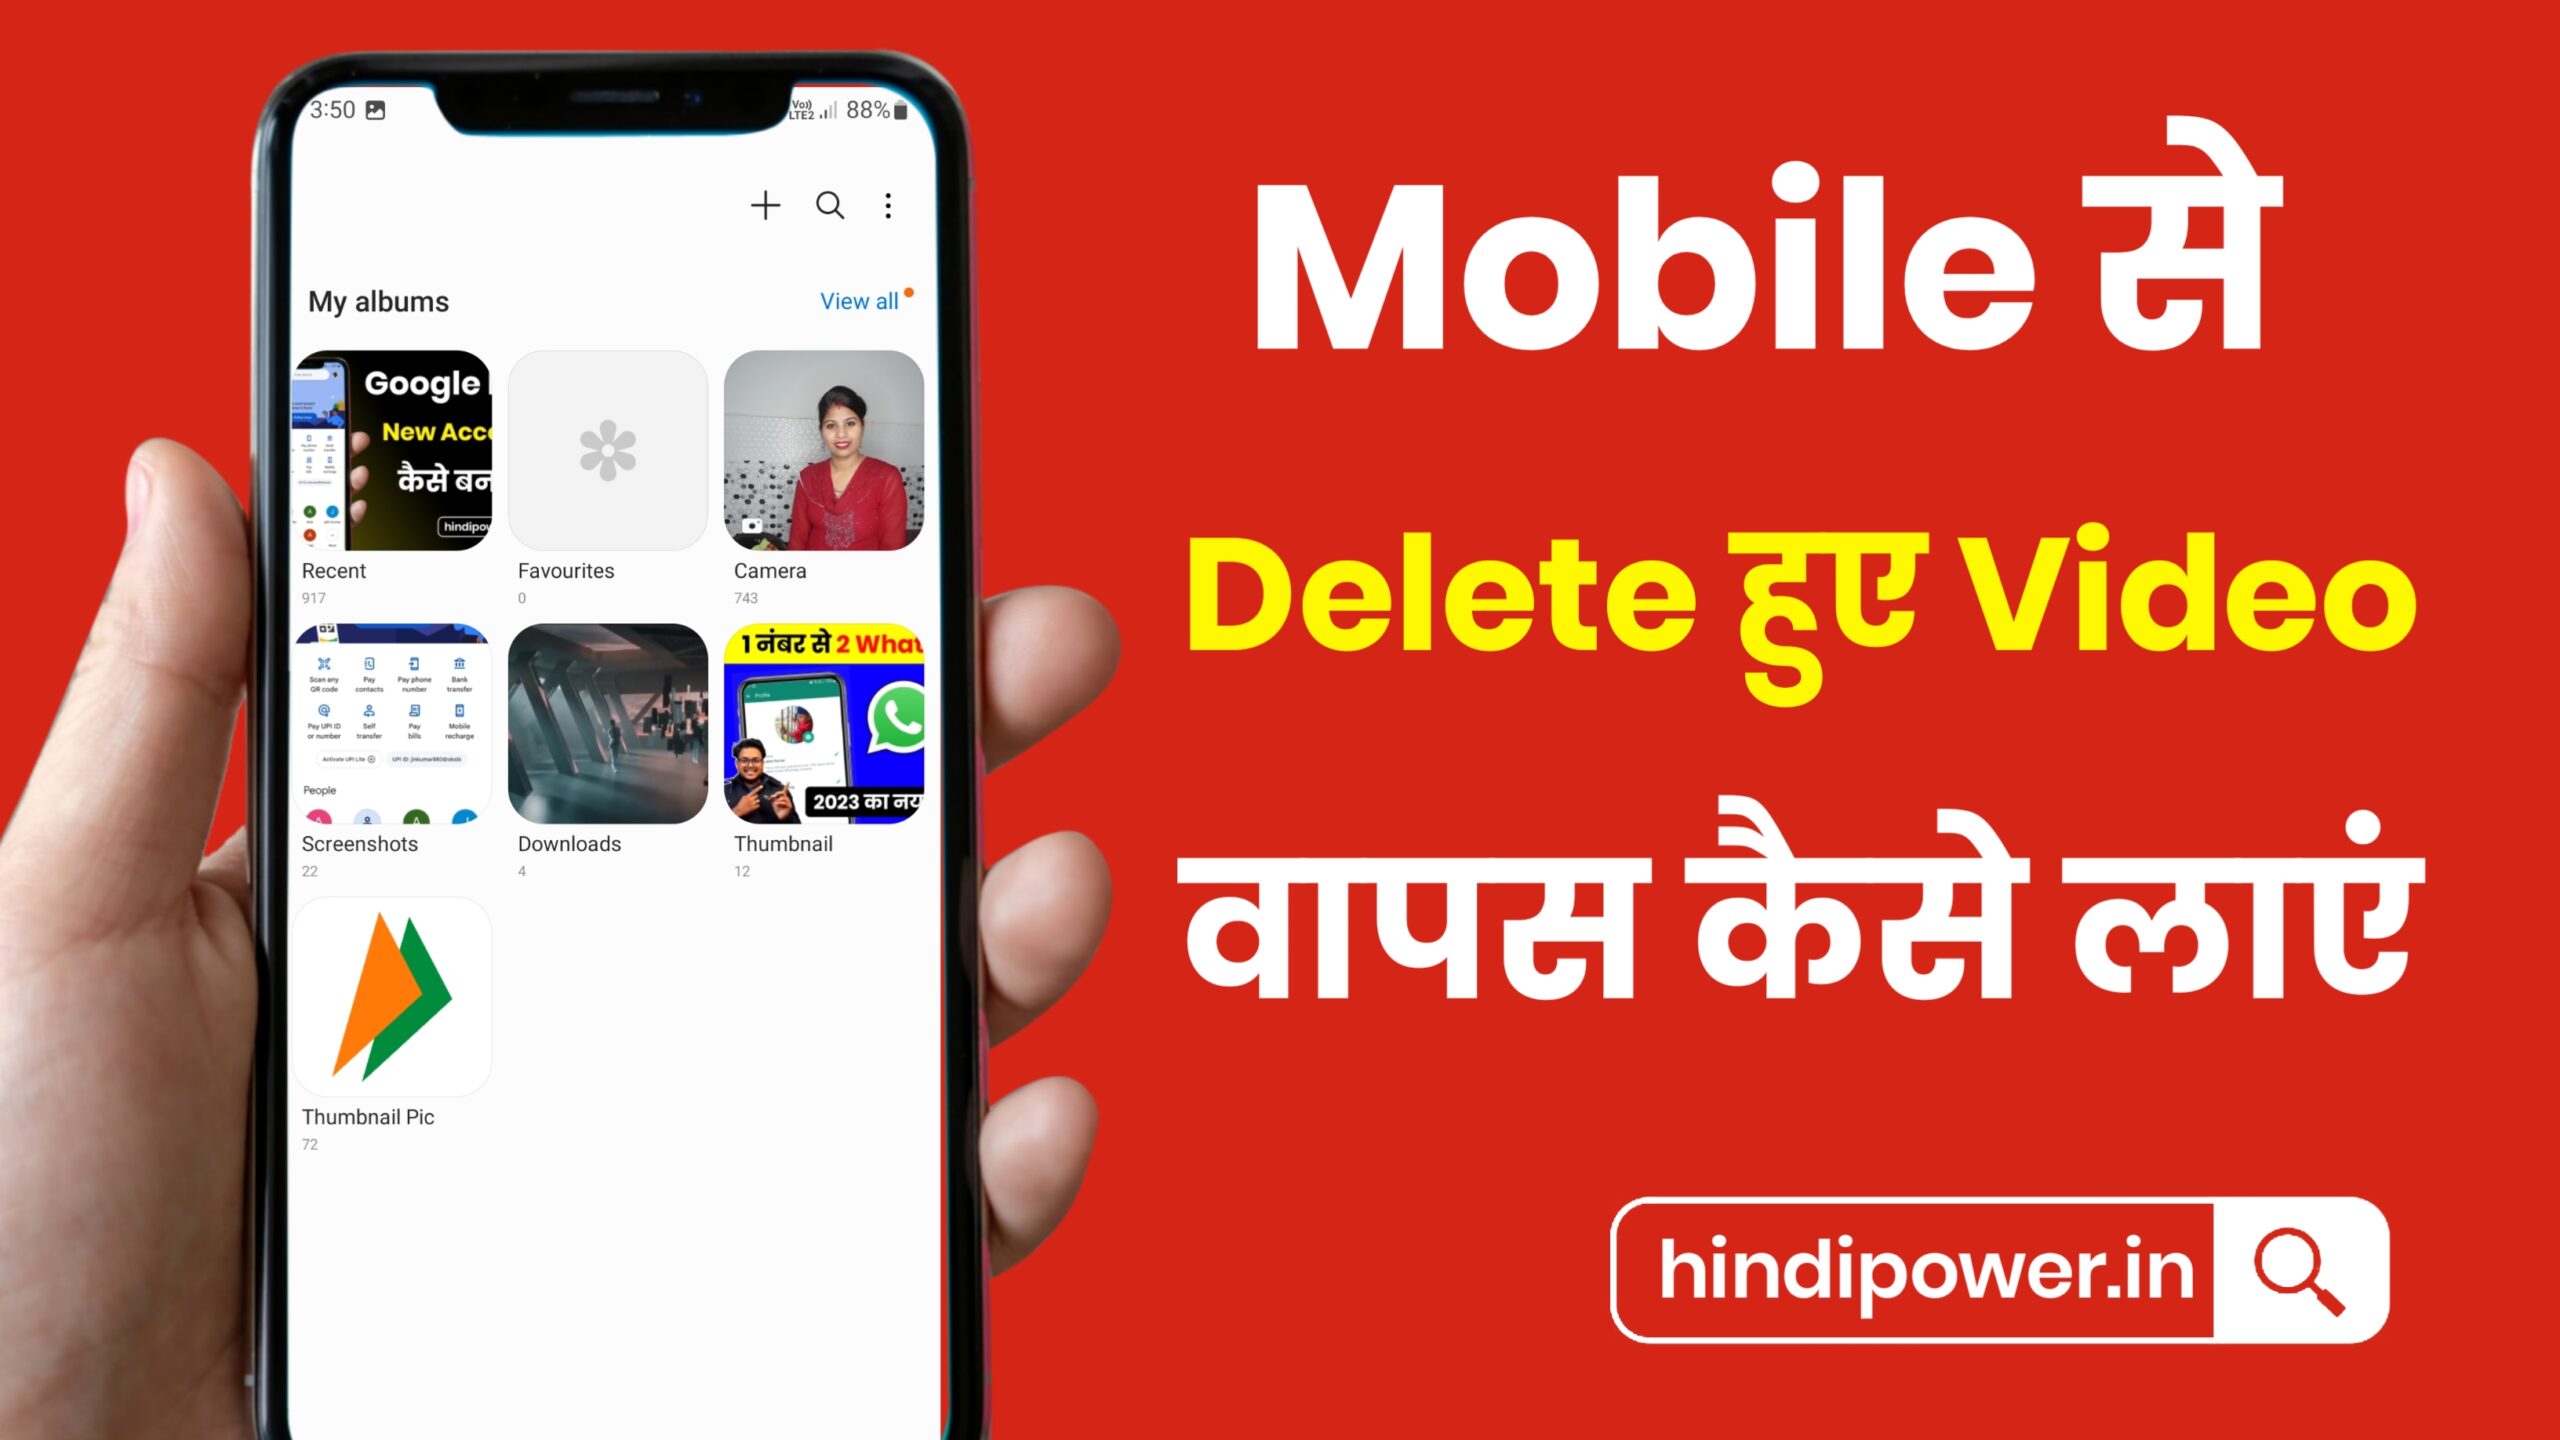 2023 How To Recover Deleted Video In Android Mobile | मोबाइल से डिलीट वीडियो रिकवर कैसे करें